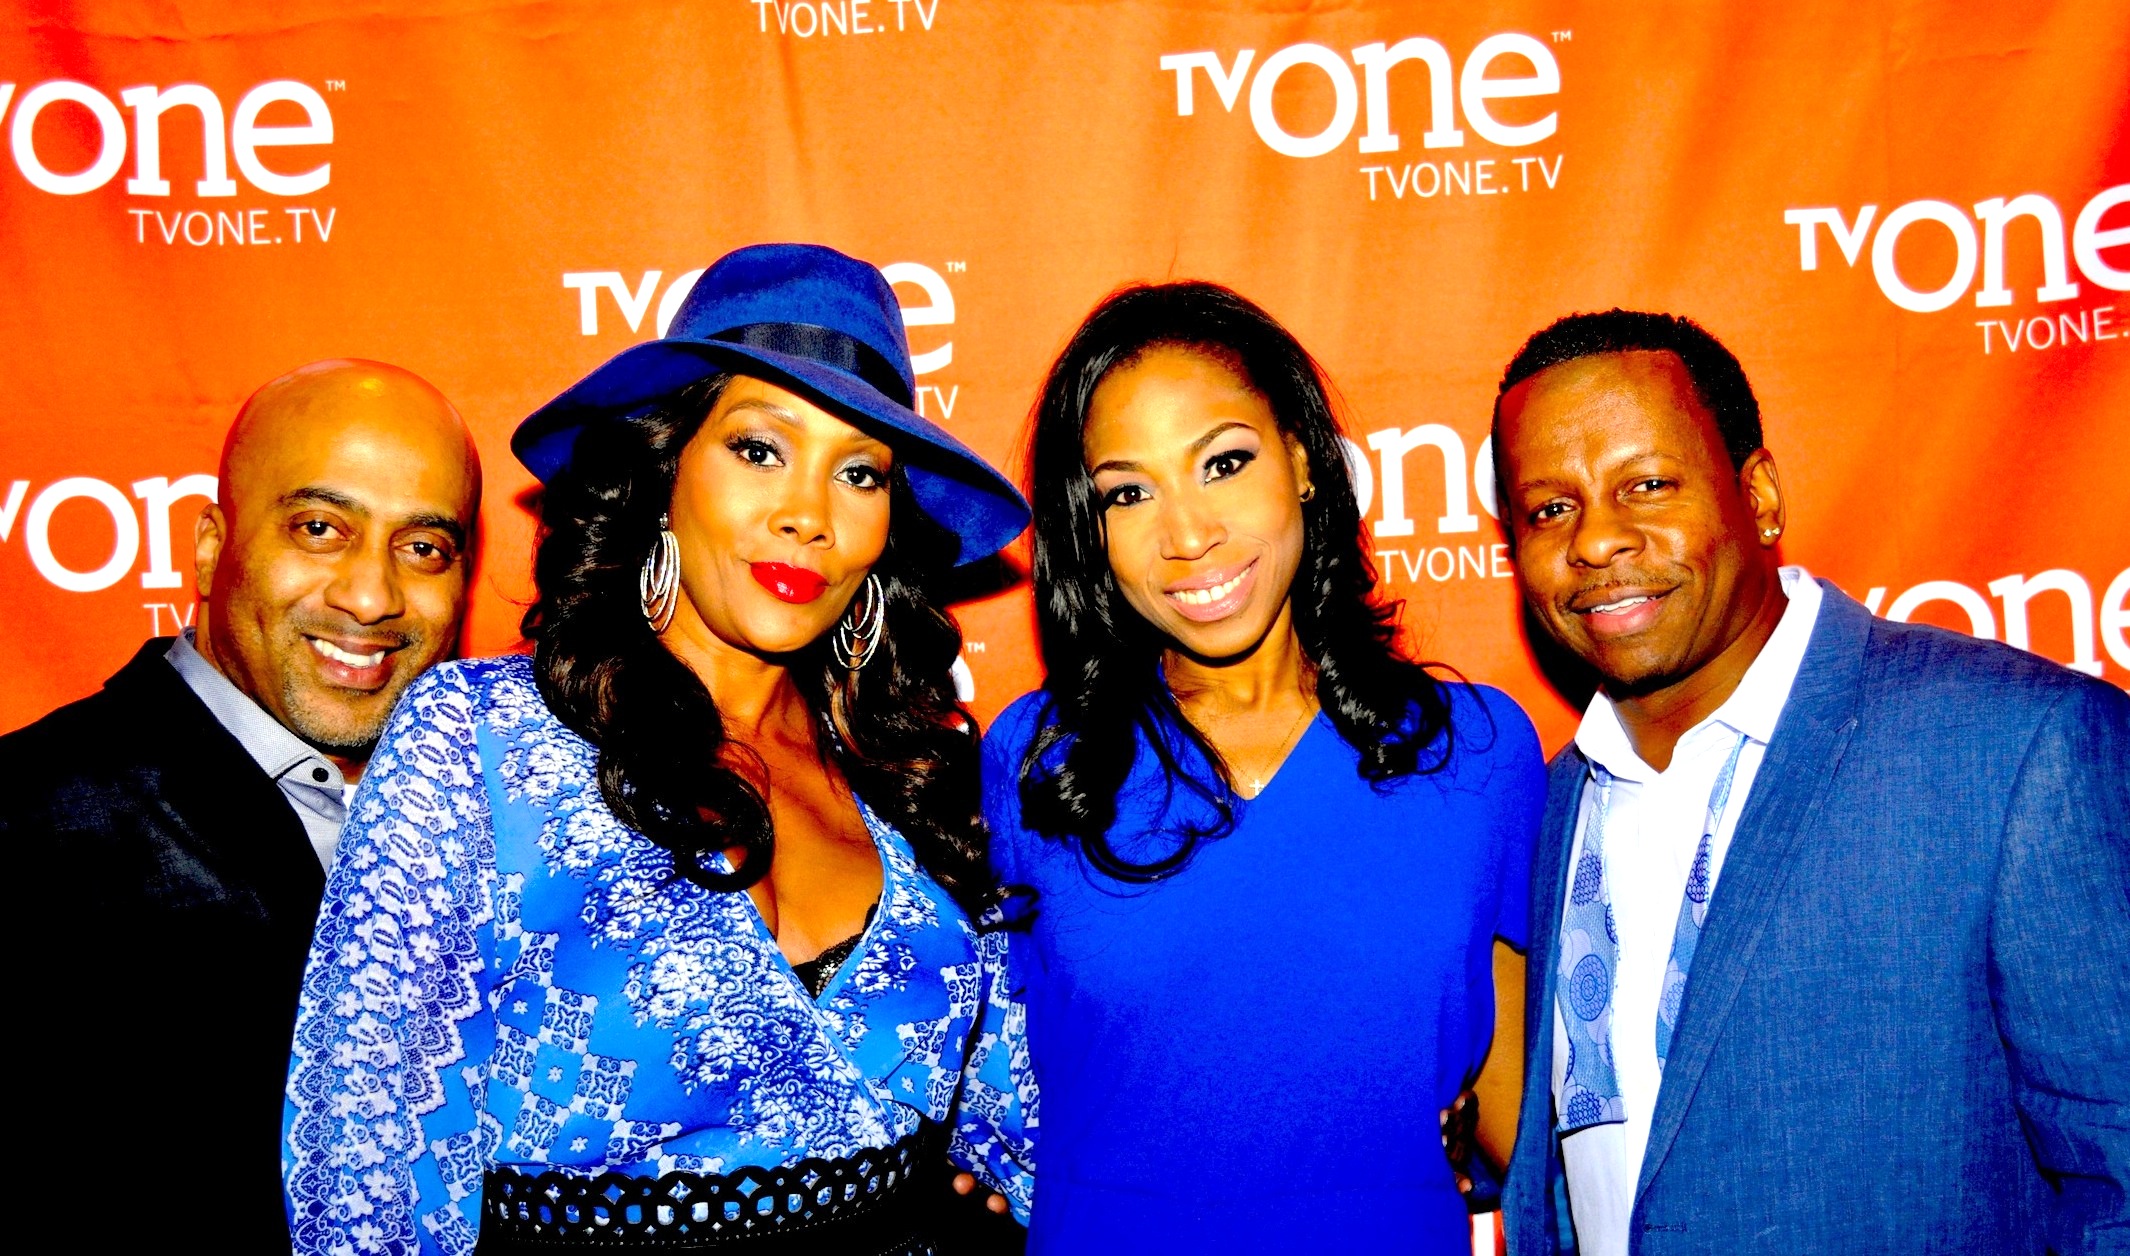 Producer Sharon Brathwaite with Vivica Fox for the red carpet premiere of TV One's 